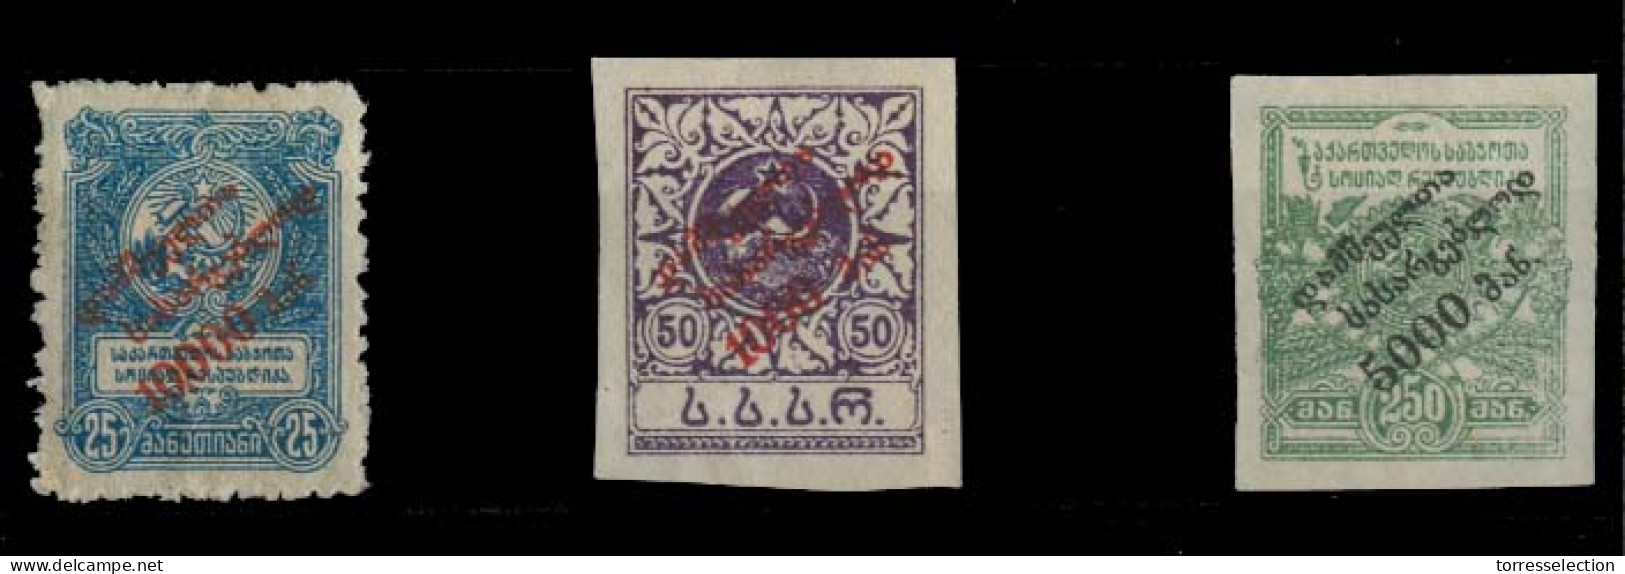 GEORGIA. C.1920. 3 Overprinted Stamps. Sold As Is. Rare In All Forms. - Géorgie